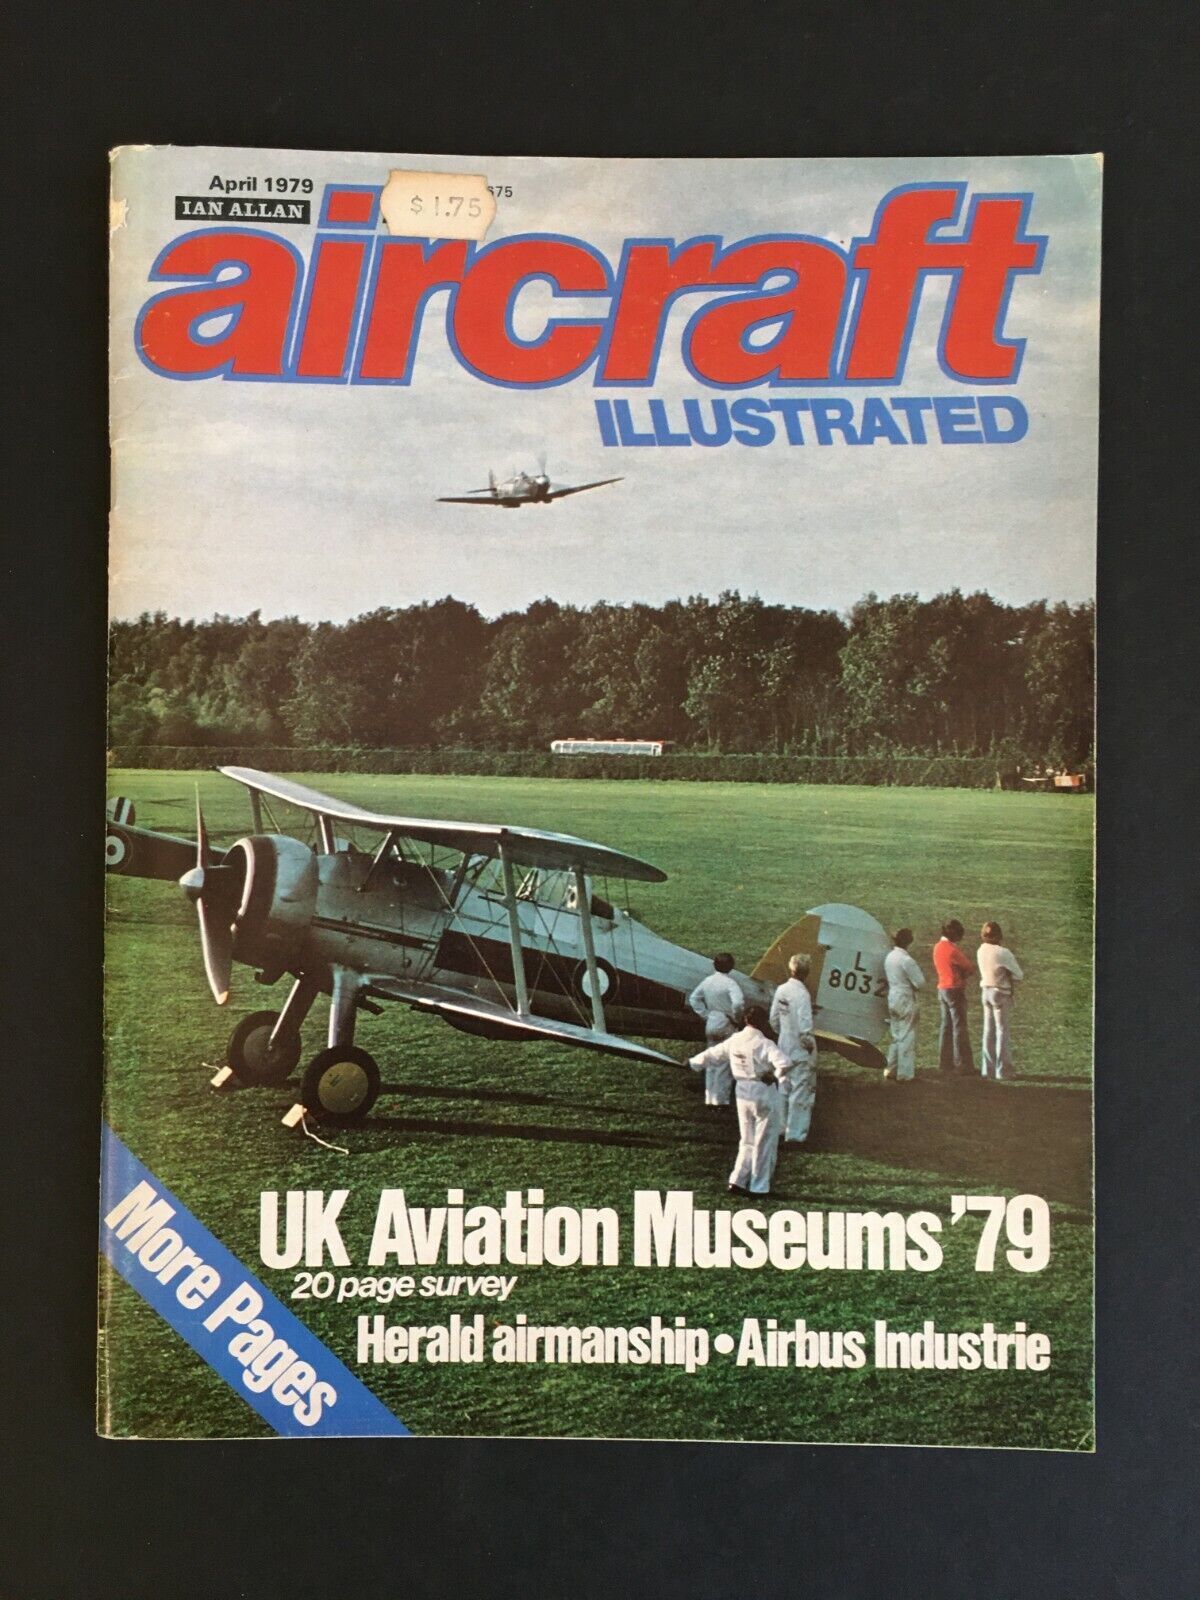 AIRCRAFT ILLUSTRATED Magazine APRIL 1979 IAN ALLAN aviation airlines airways ad